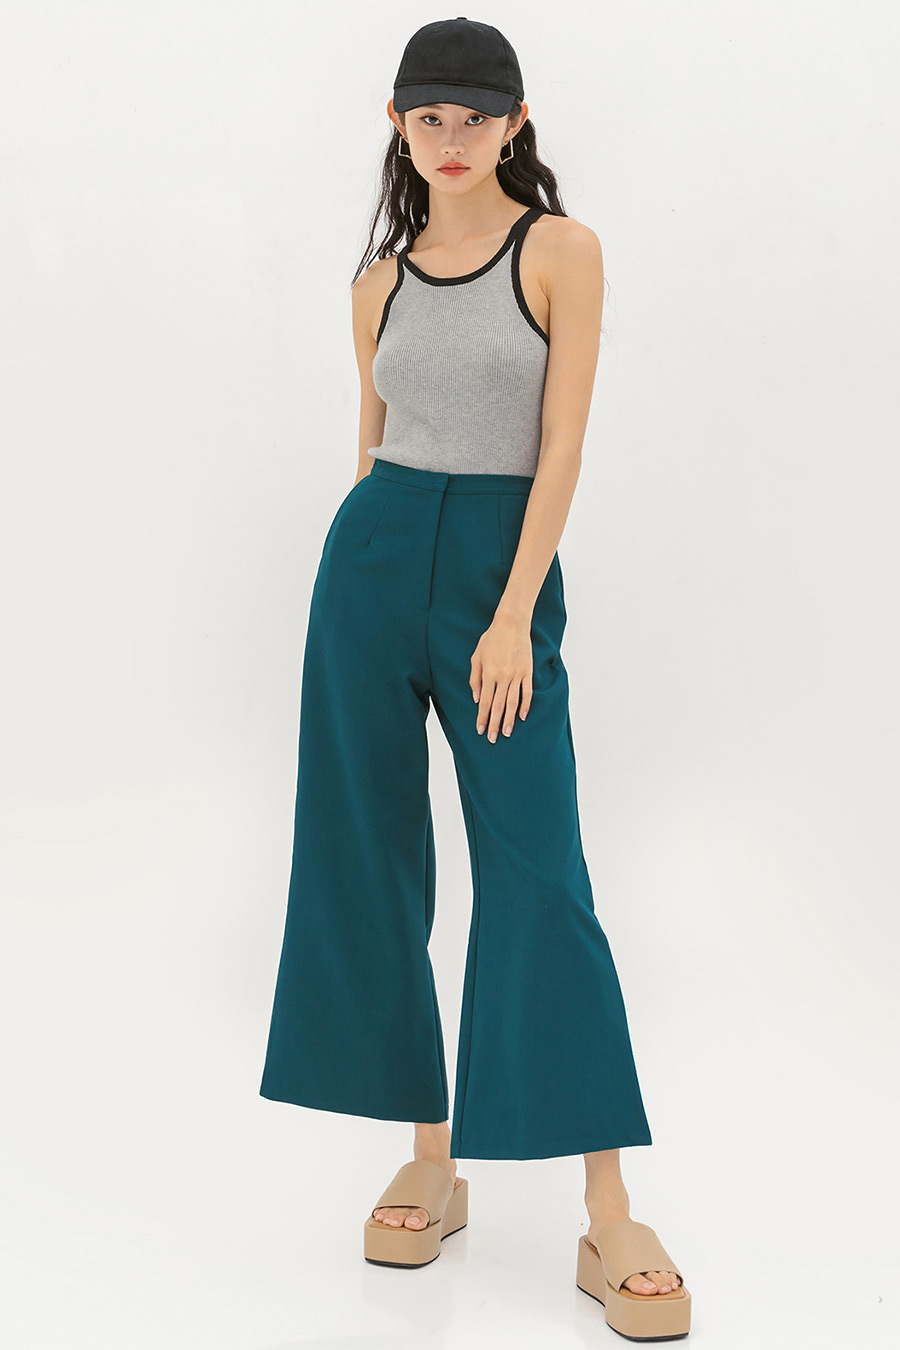 *SALE* BAYLEIGH PANTS - AEGAN [BY MODPARADE]